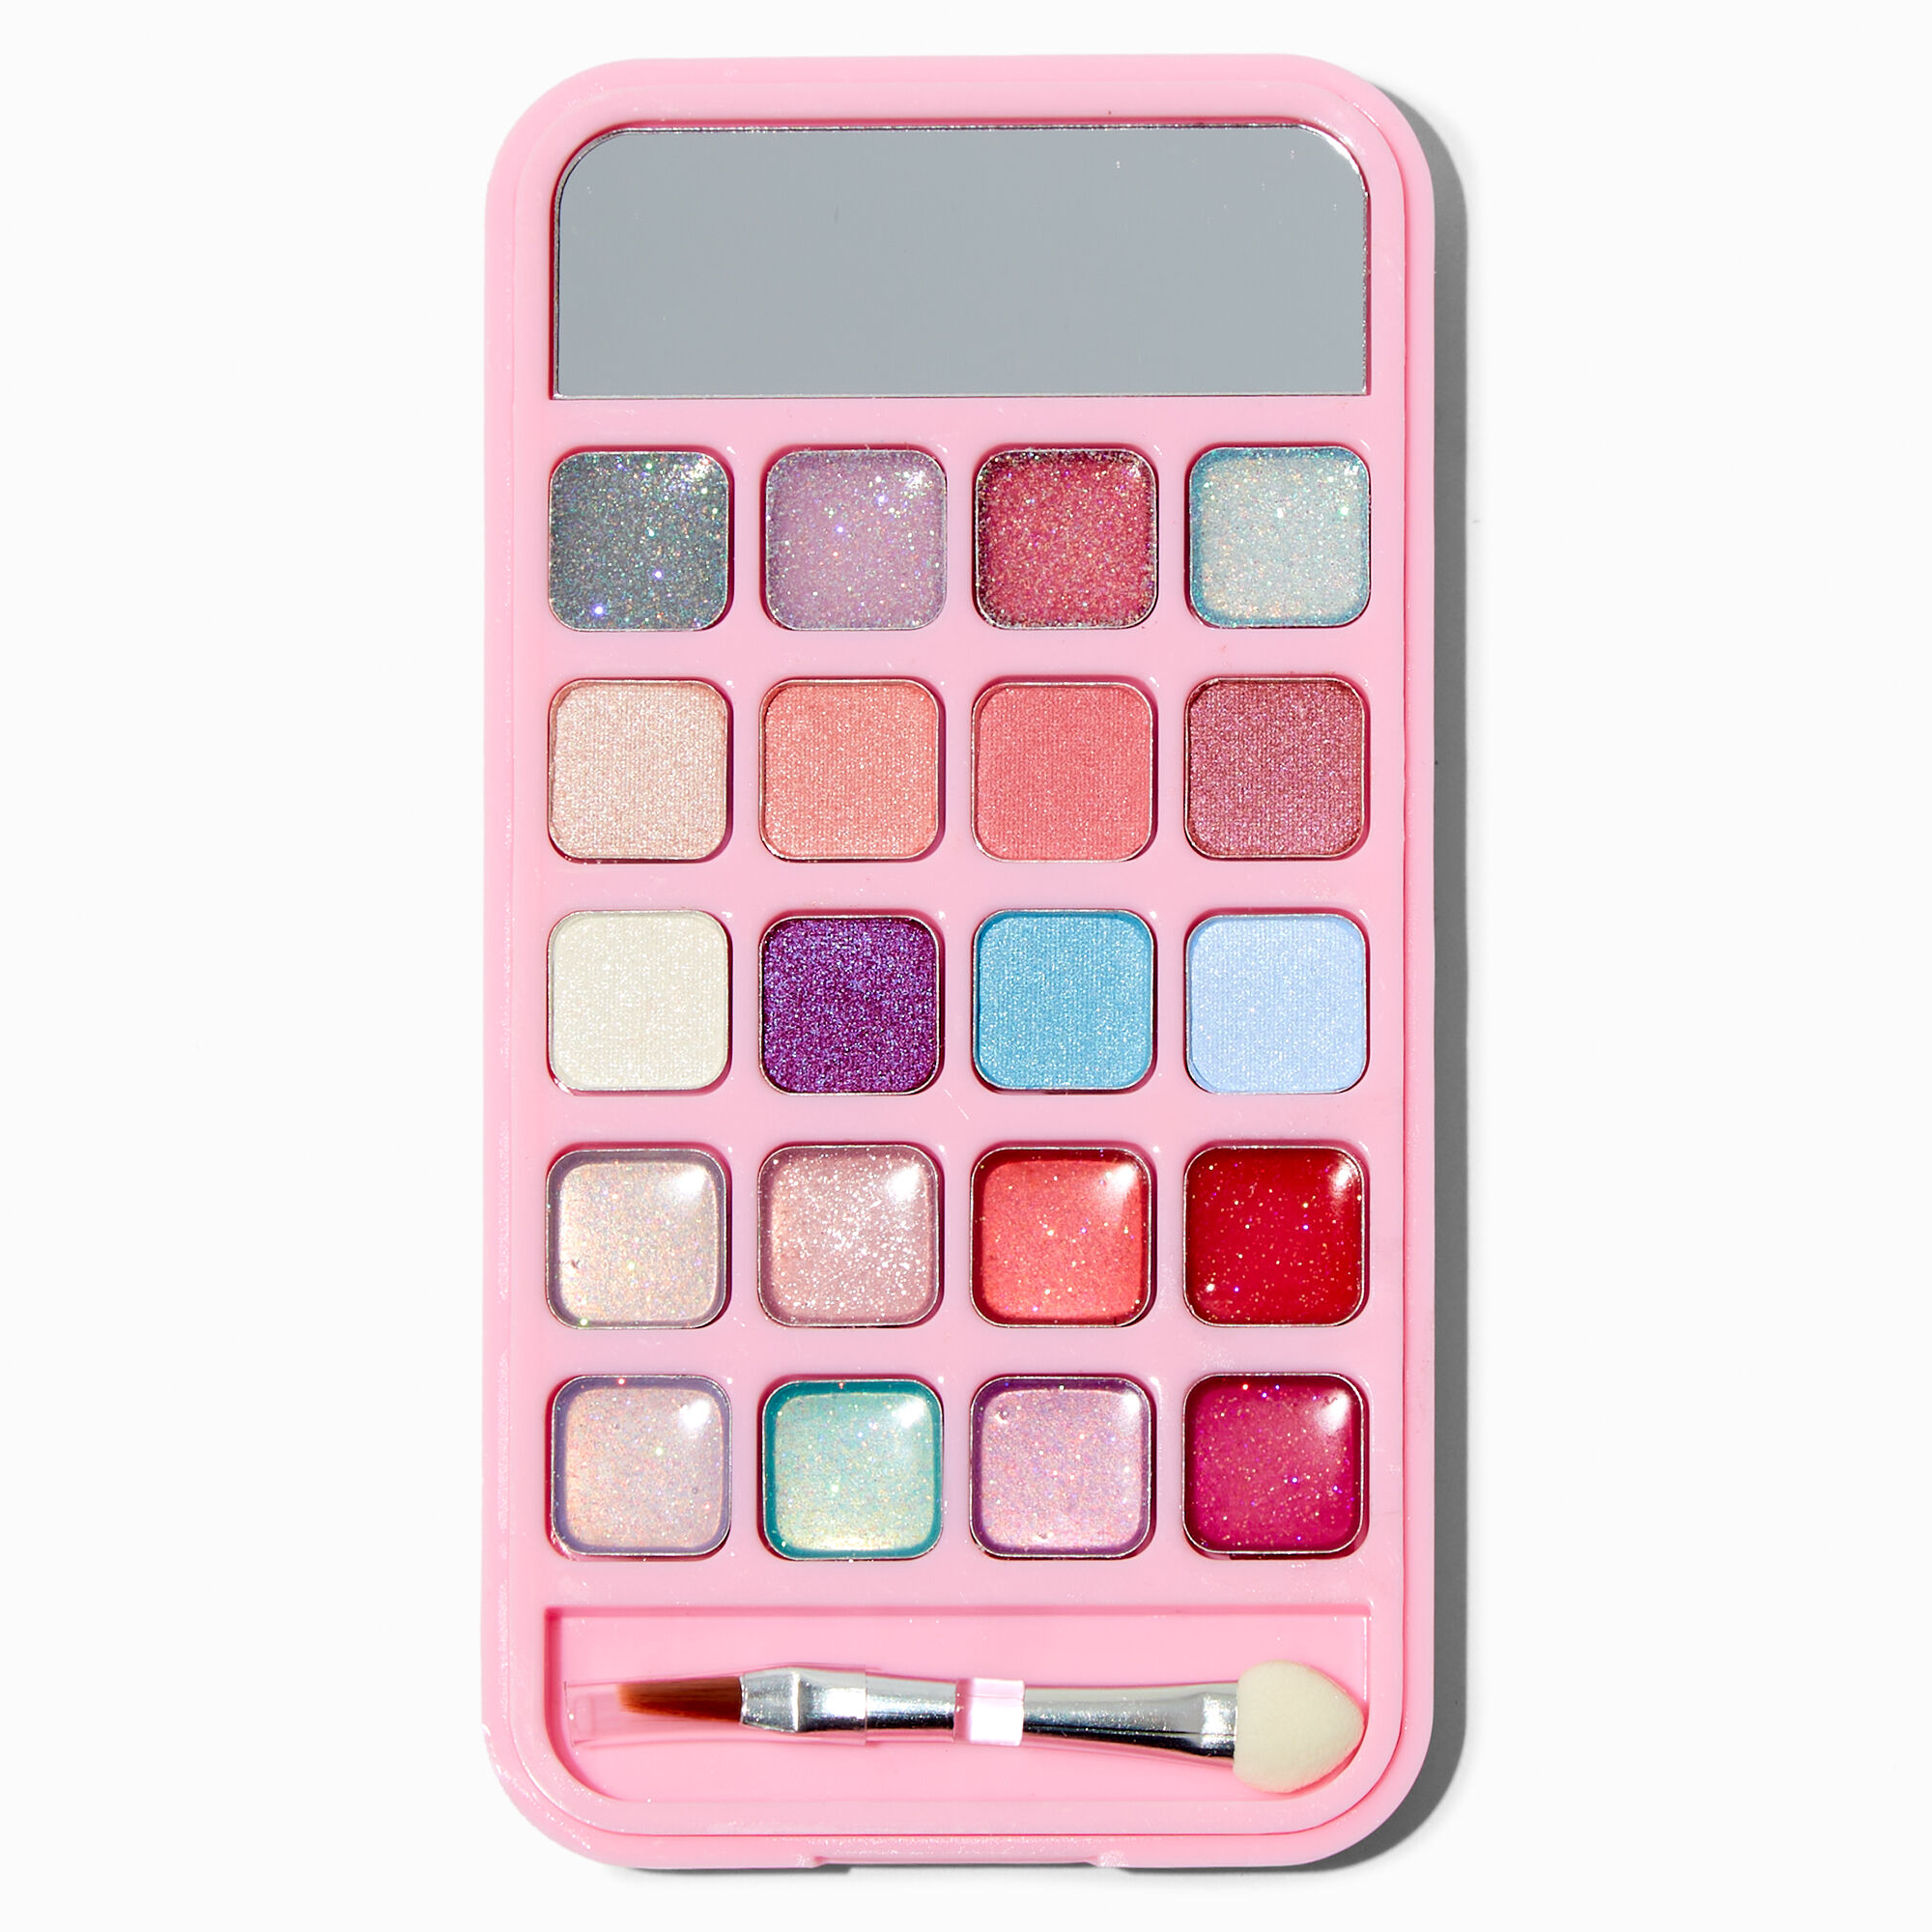 View Claires Christmas Gingerbread Bling Lip Gloss Palette information